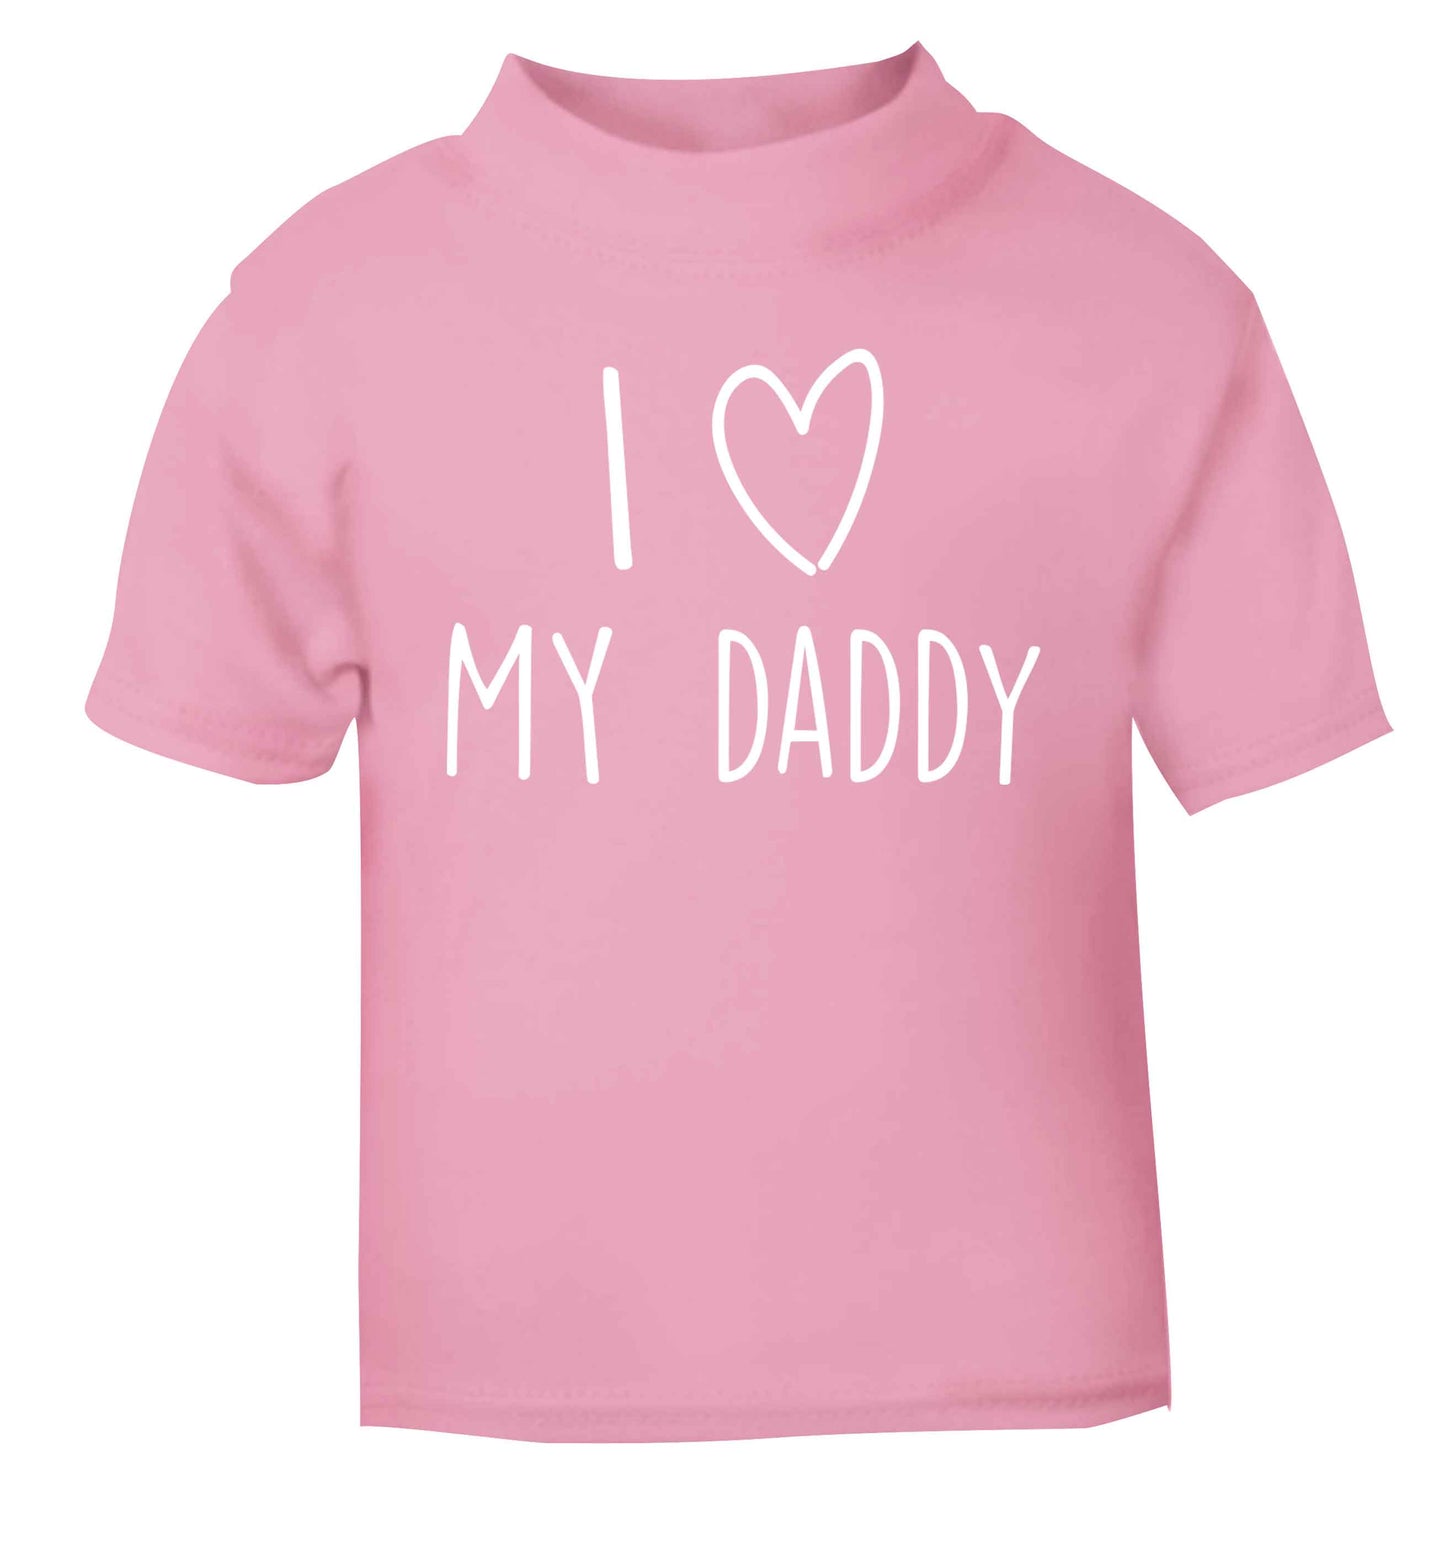 I love my daddy light pink baby toddler Tshirt 2 Years